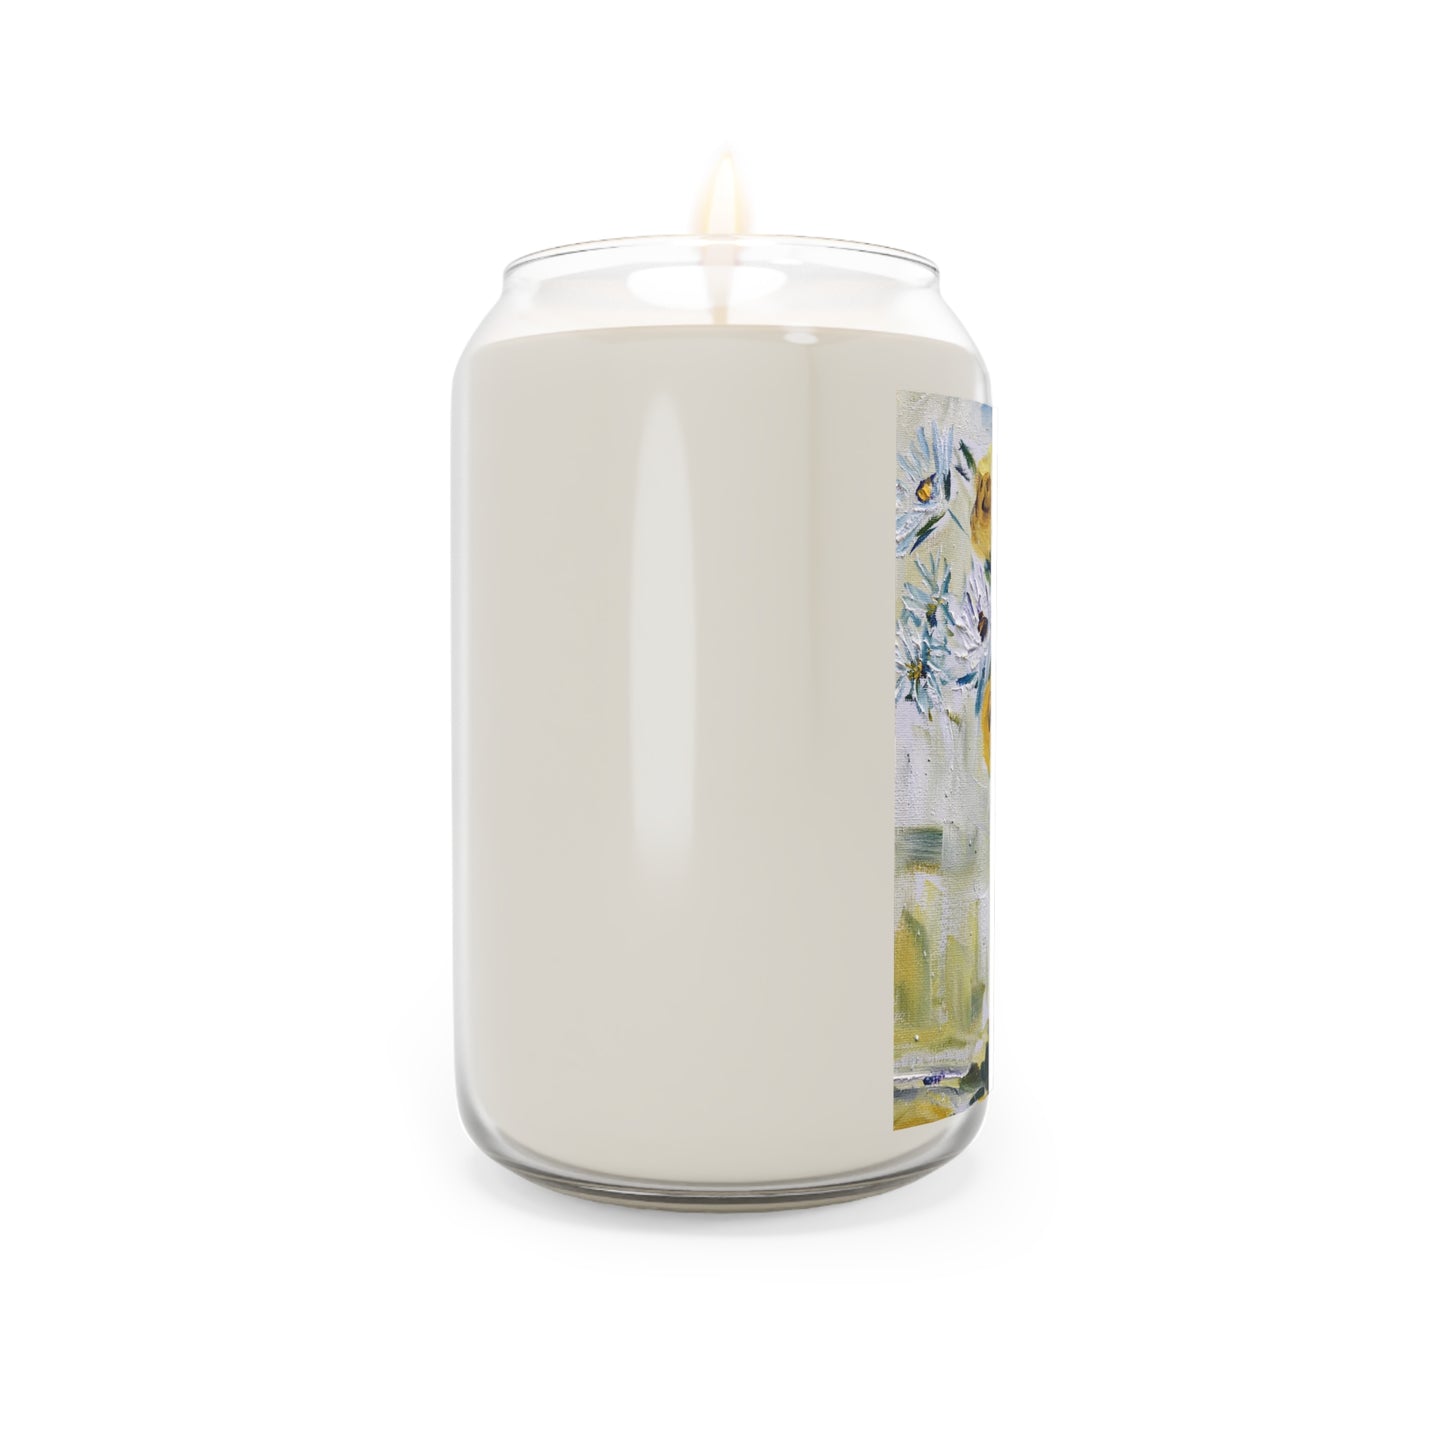 Daisies and Yellow Roses Scented Candle, 13.75oz